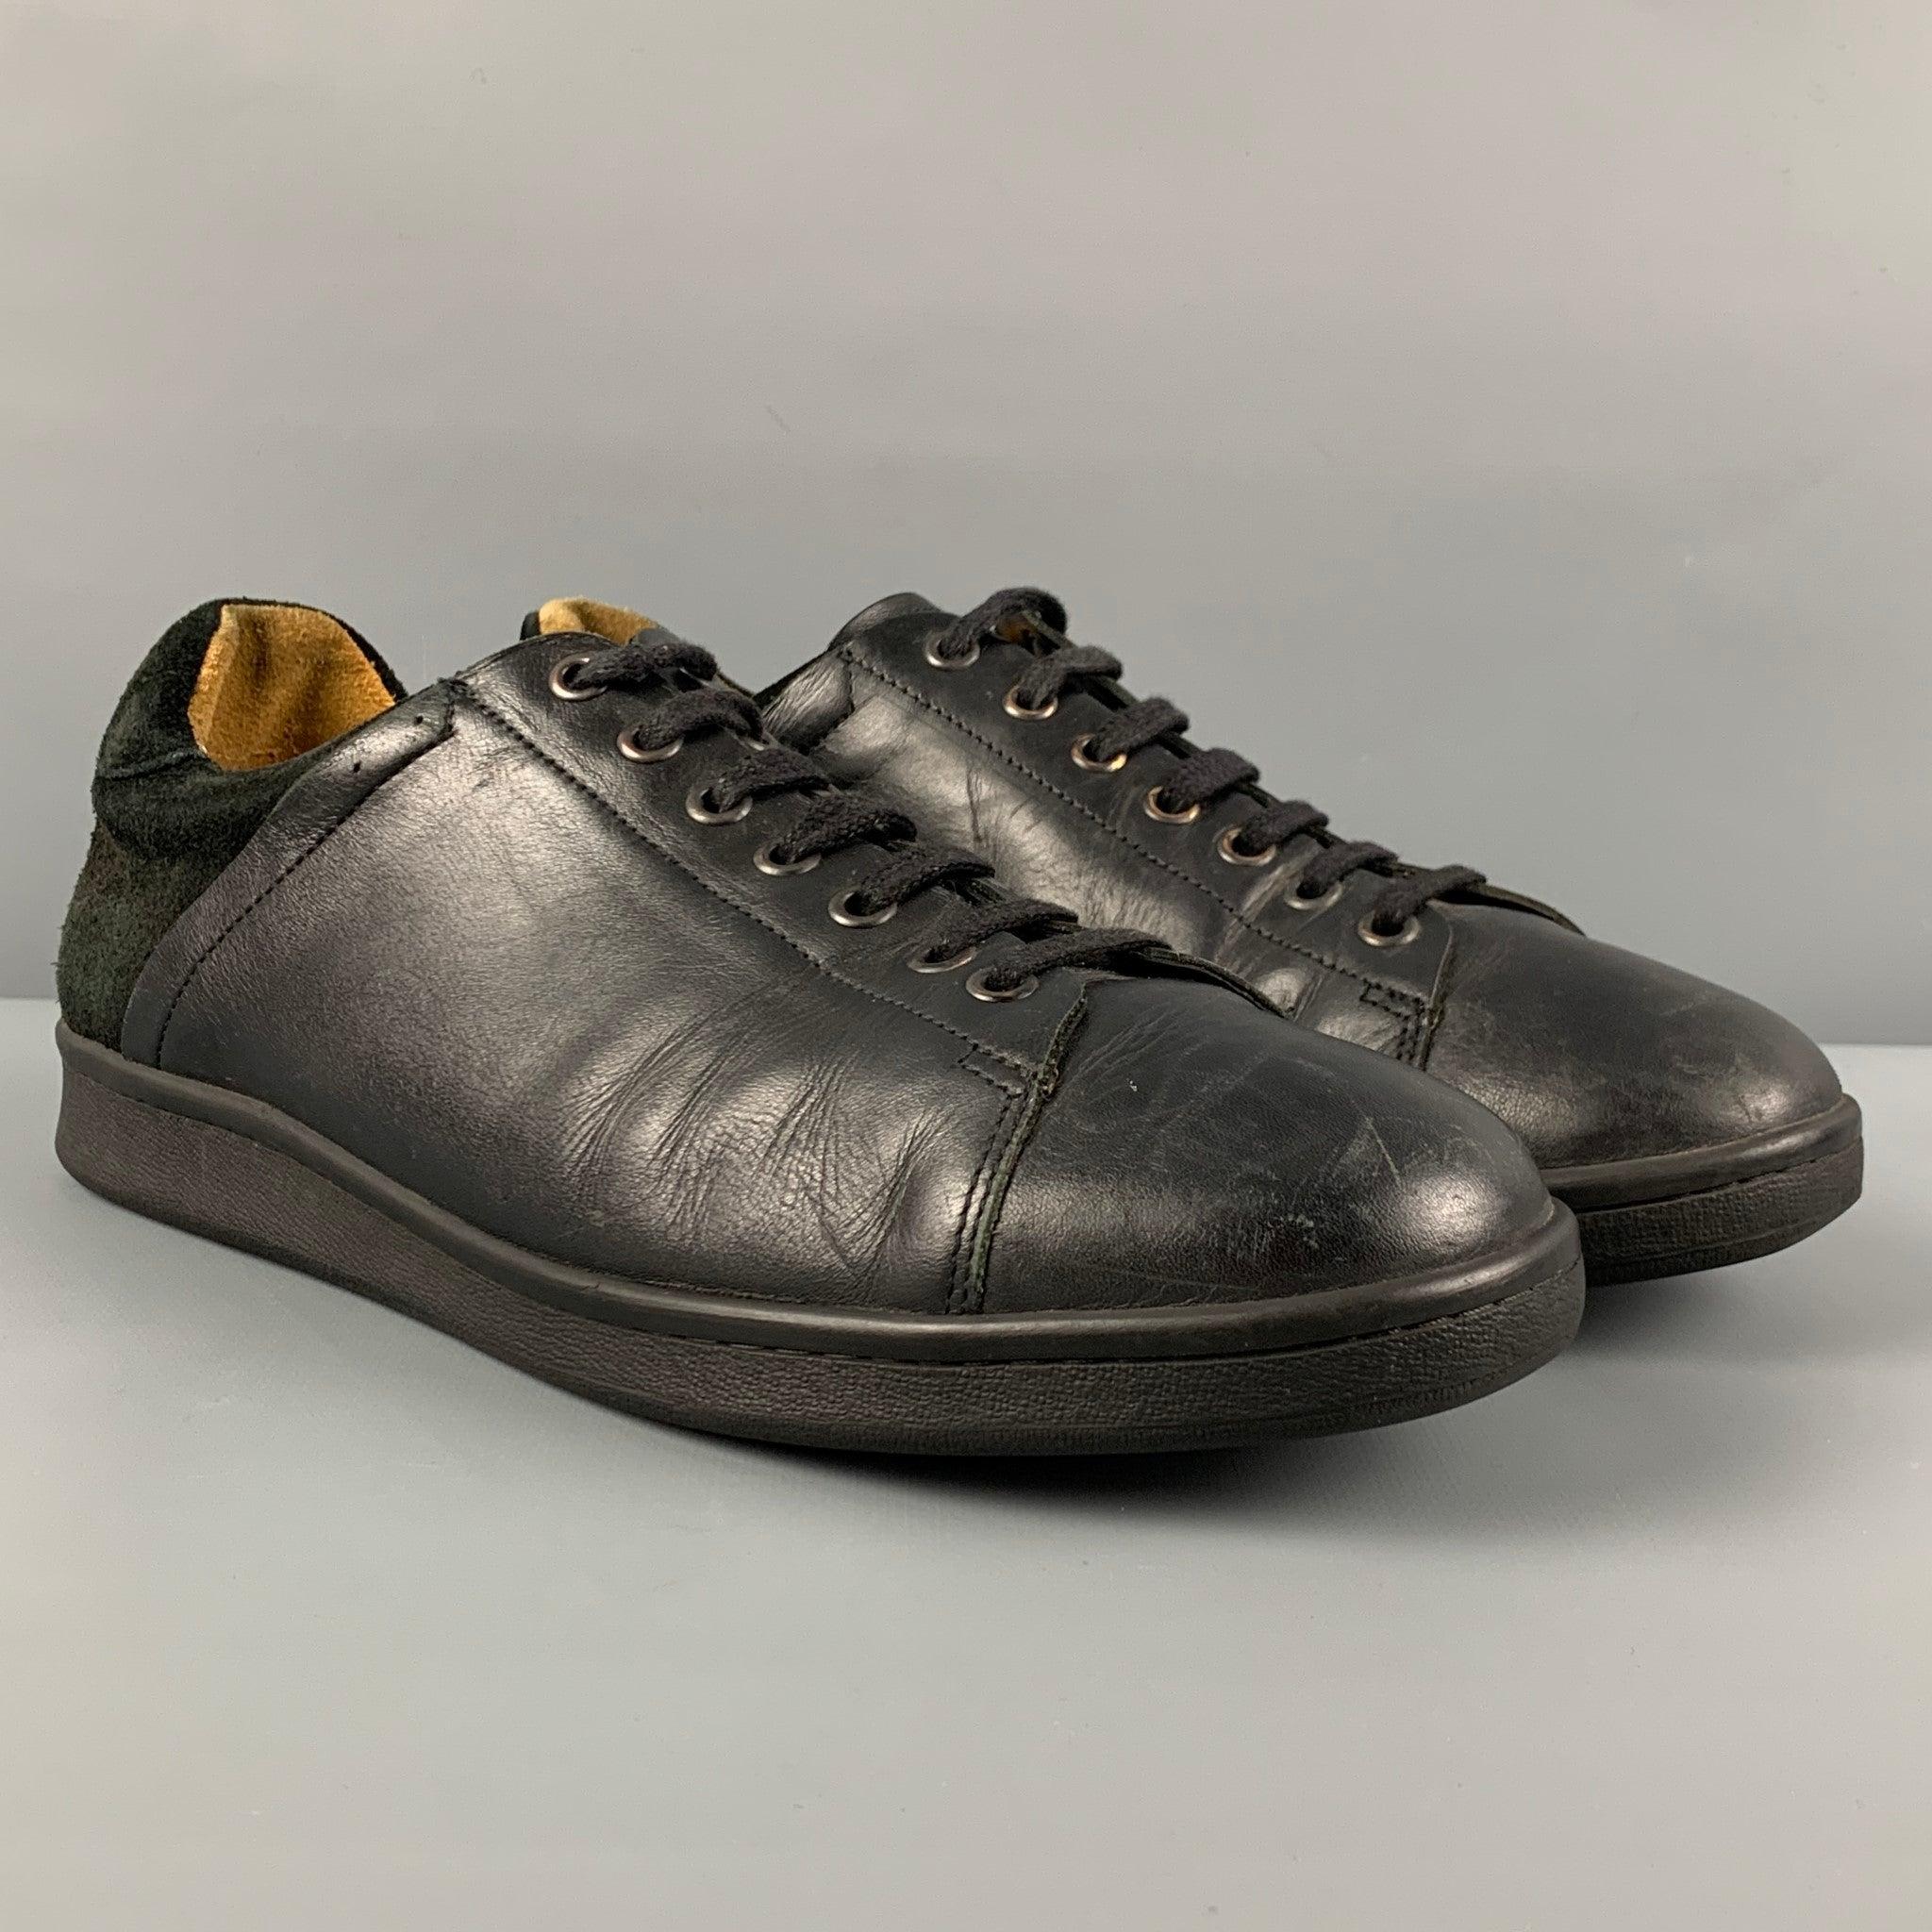 DAMIR DOMA sneakers comes in a black leather featuring a suede trim and a lace up closure. Made in Portugal. Good
Pre-Owned Condition. Moderate wear. As-Is.  

Marked:   43Outsole: 11.5 inches  x 4 inches 
  
  
 
Reference: 118724
Category: